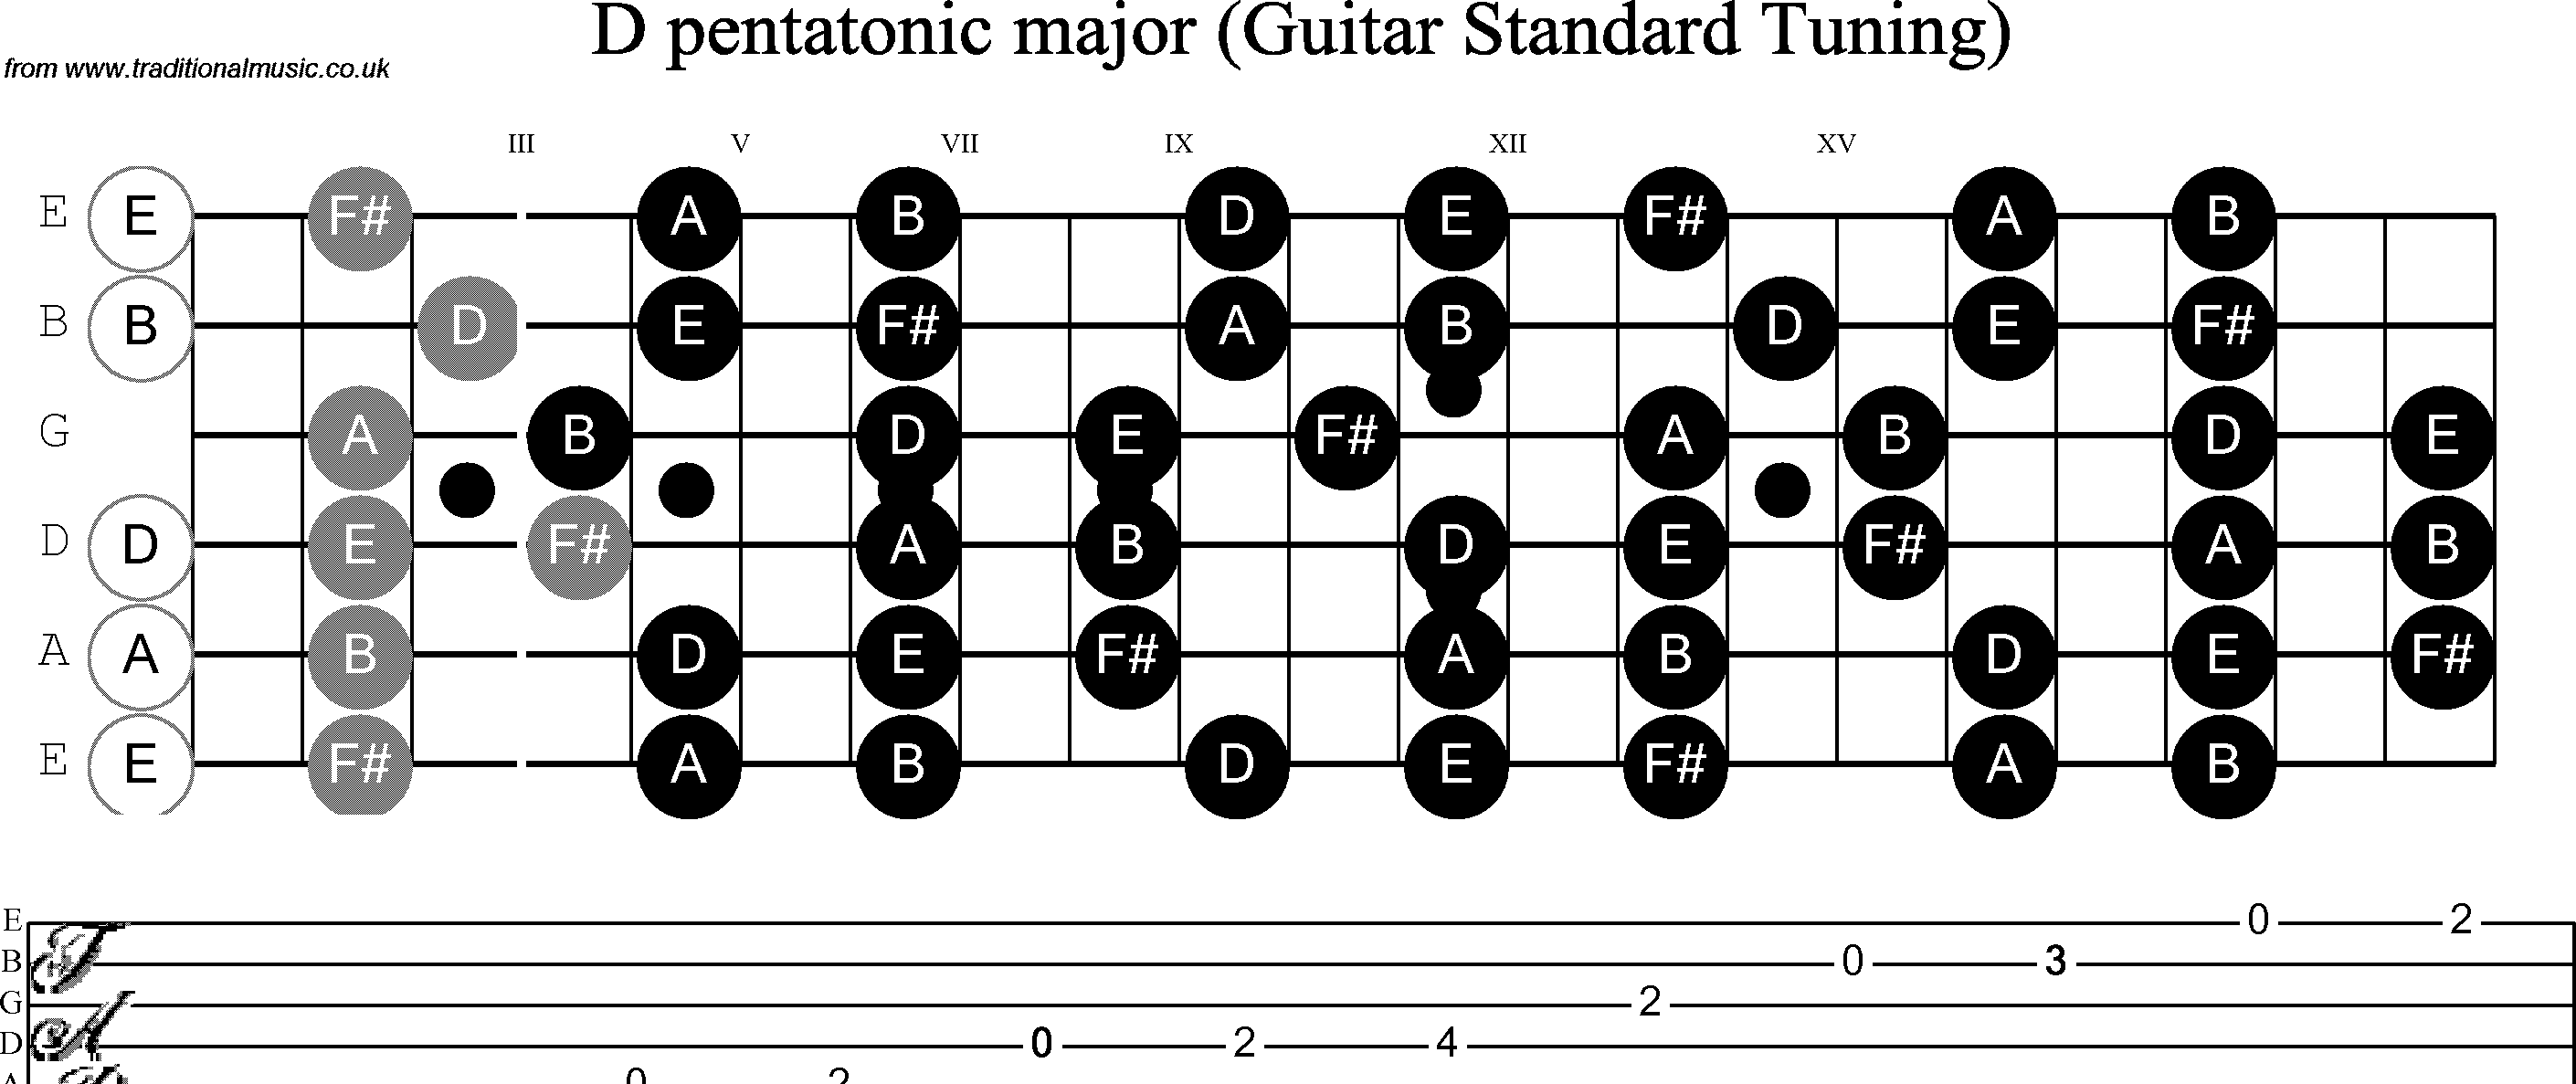 Scale, stave and neck diagram for Guitar: D Pentatonic